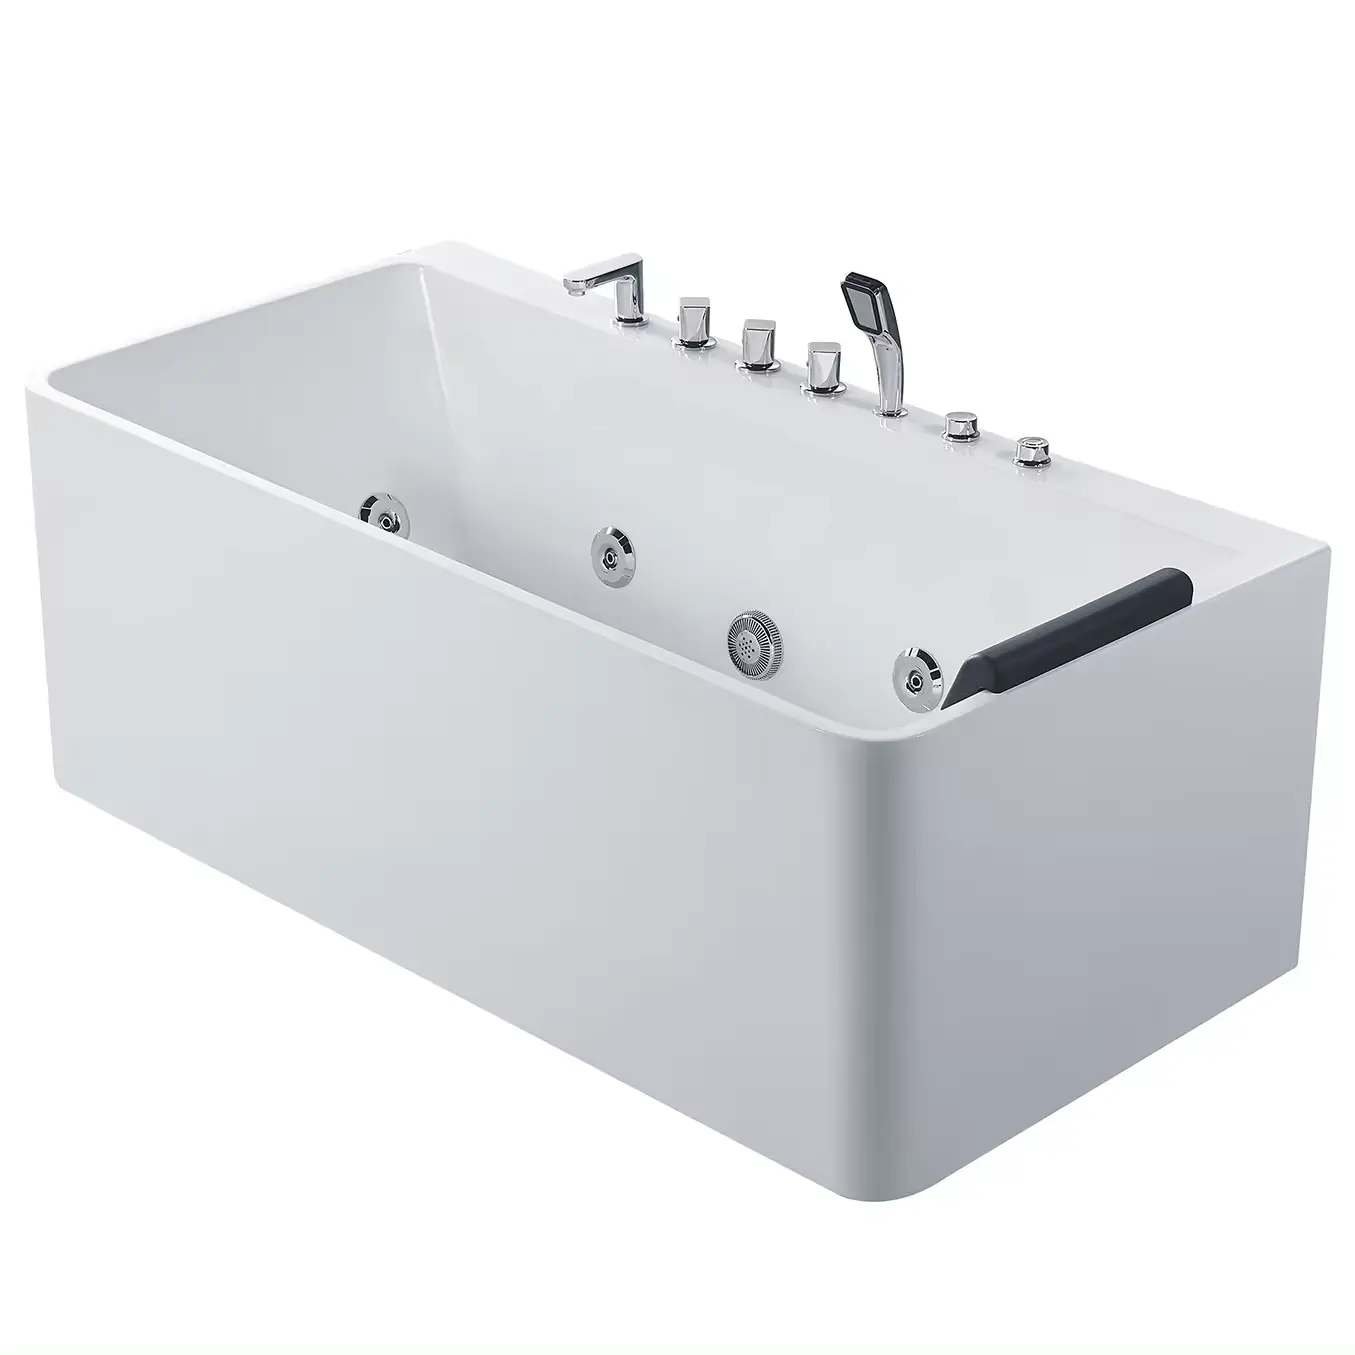 K-8795 Acrylic Whirlpool Tubs with shower faucet massage spa 3 skirts corner with head rest